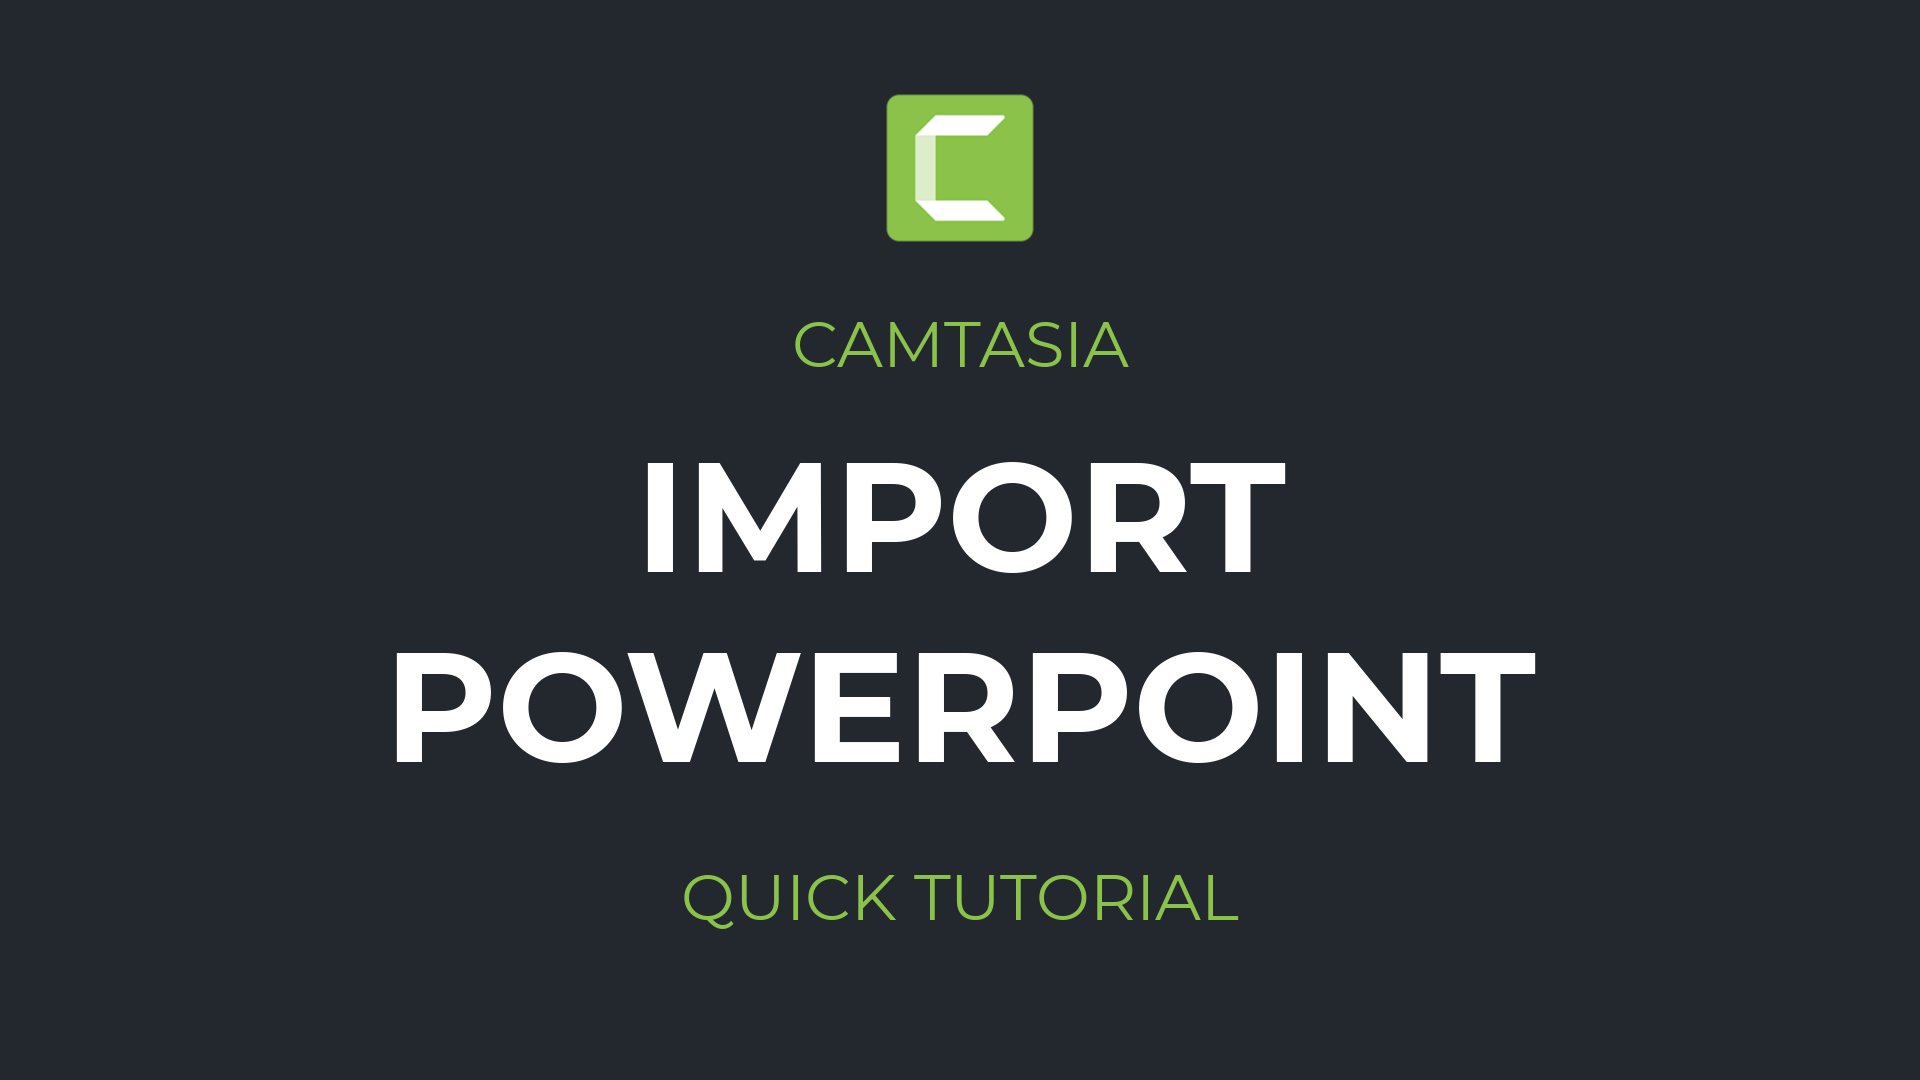 How to import PowerPoint presentations into Camtasia